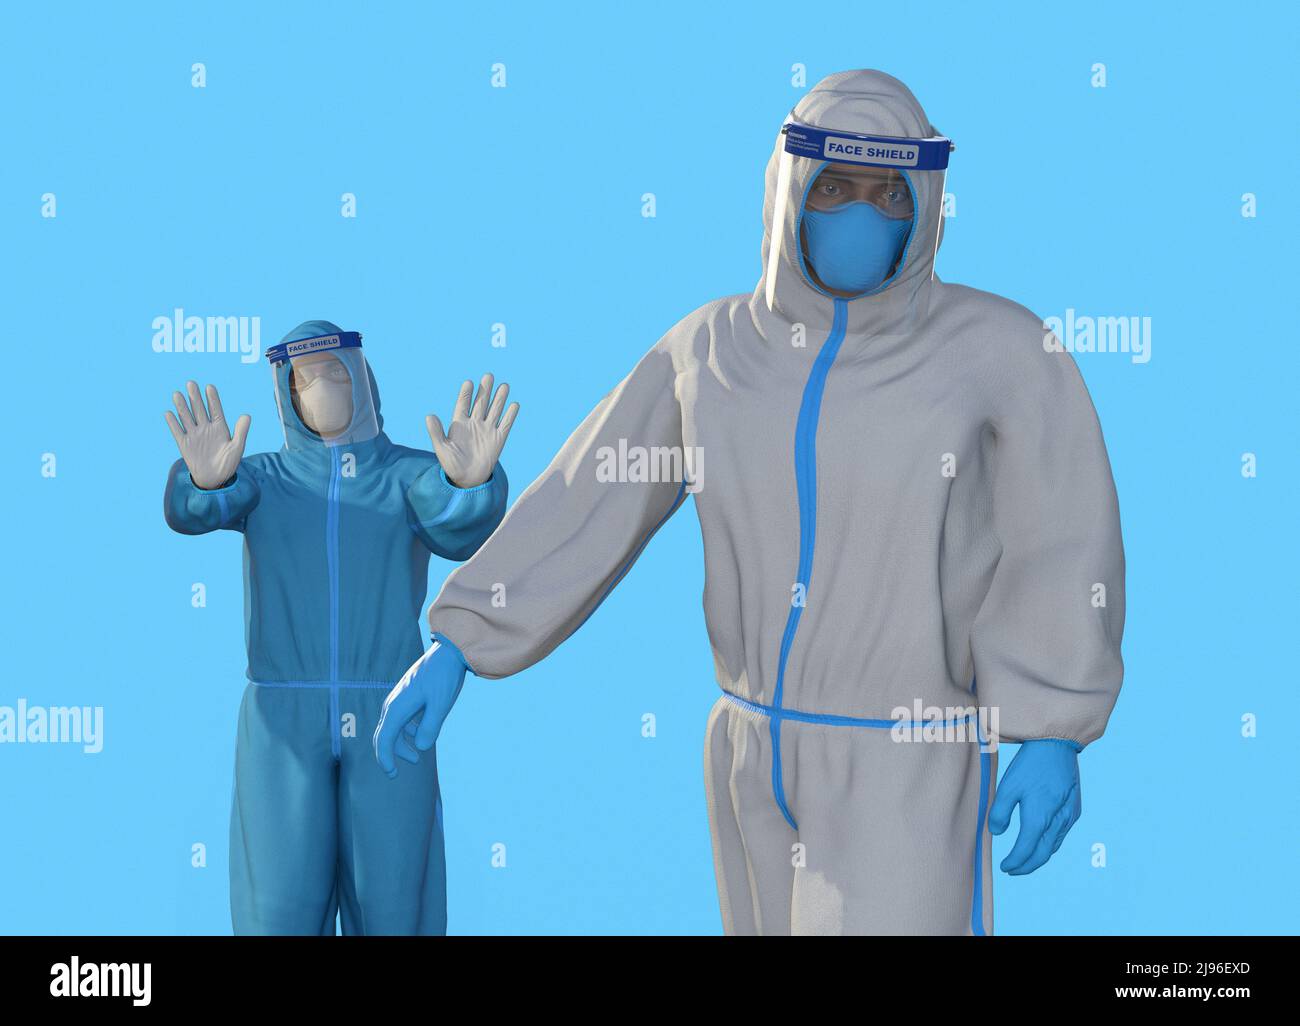 Healthcare workers wearing protective clothing, illustration Stock Photo